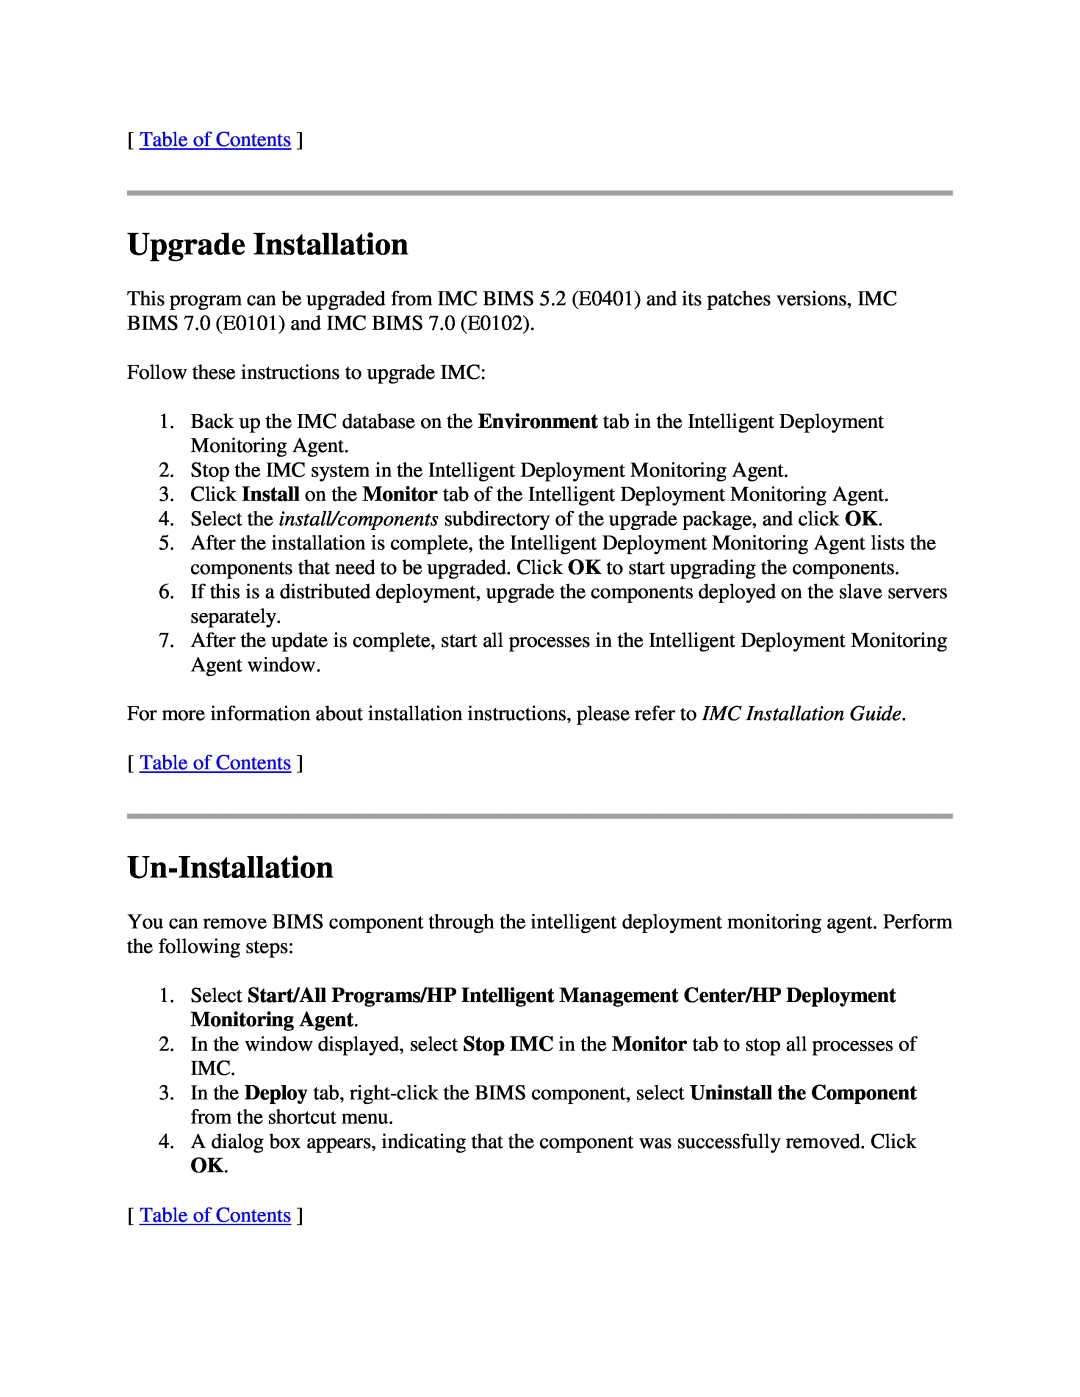 HP Branch Intellectual Management System Software manual Upgrade Installation, Un-Installation 